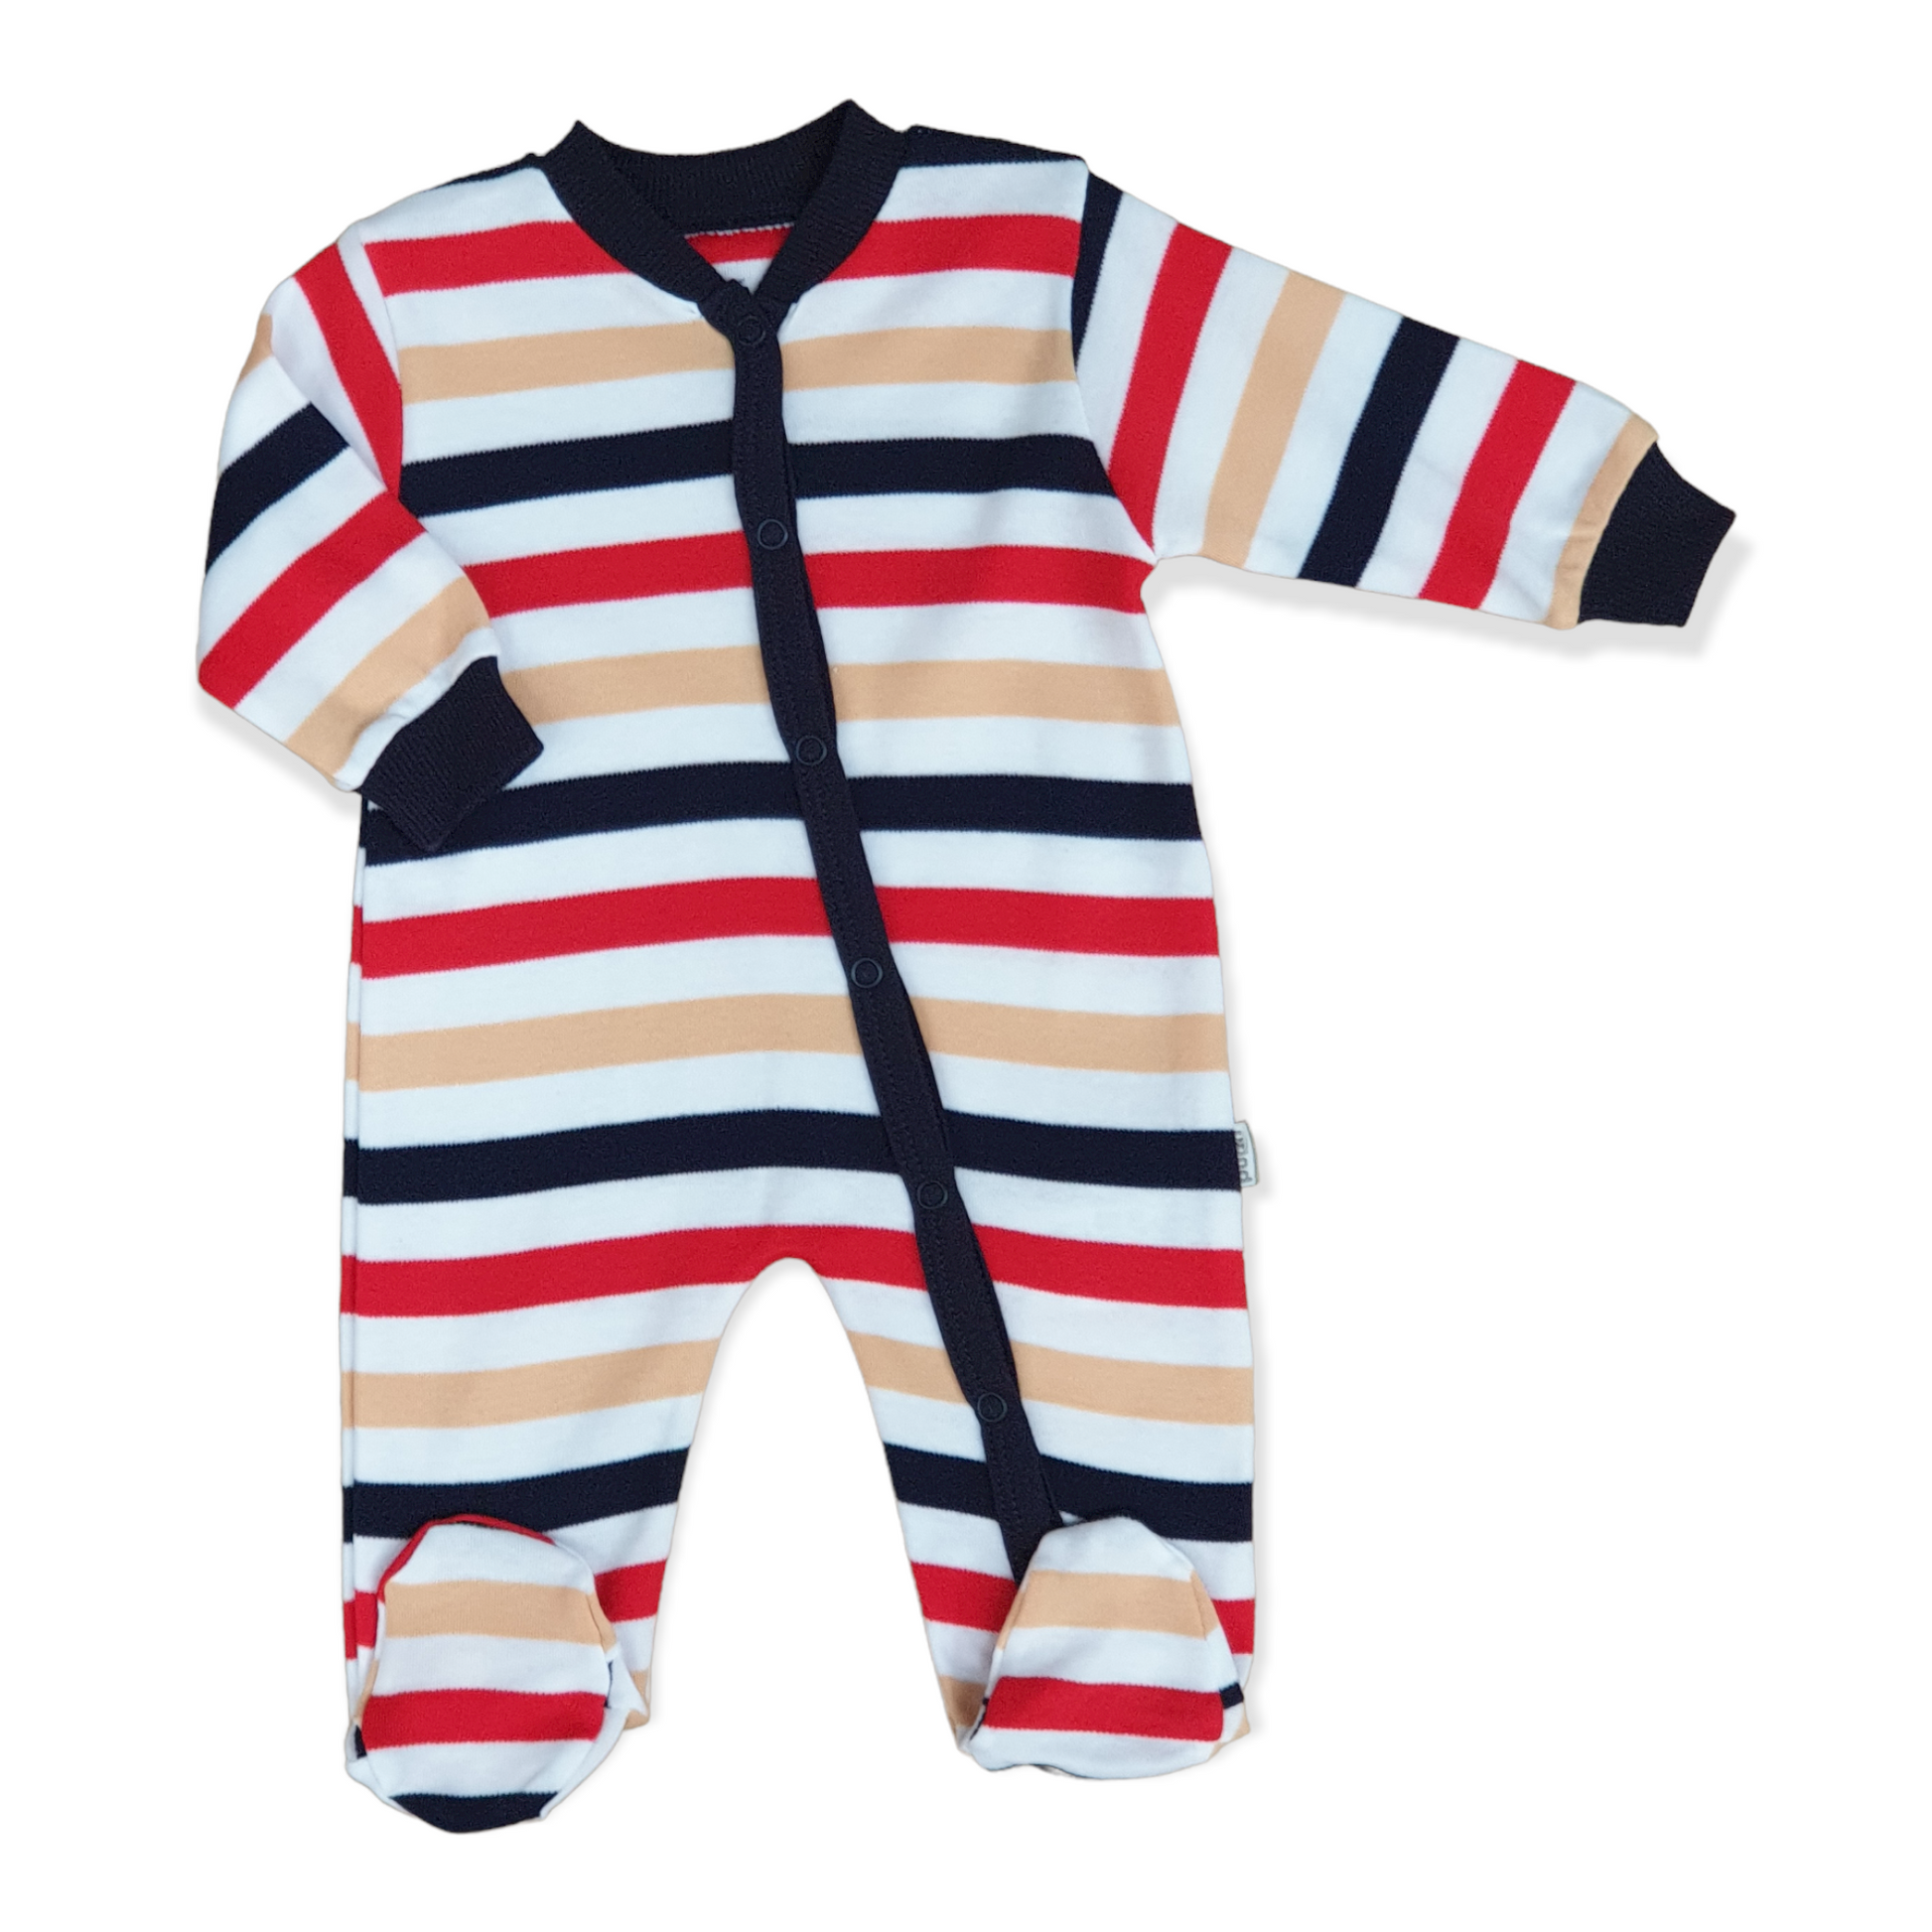 Puanbaby - Long Sleeve Colored Stripes Baby Boy Jumpsuit